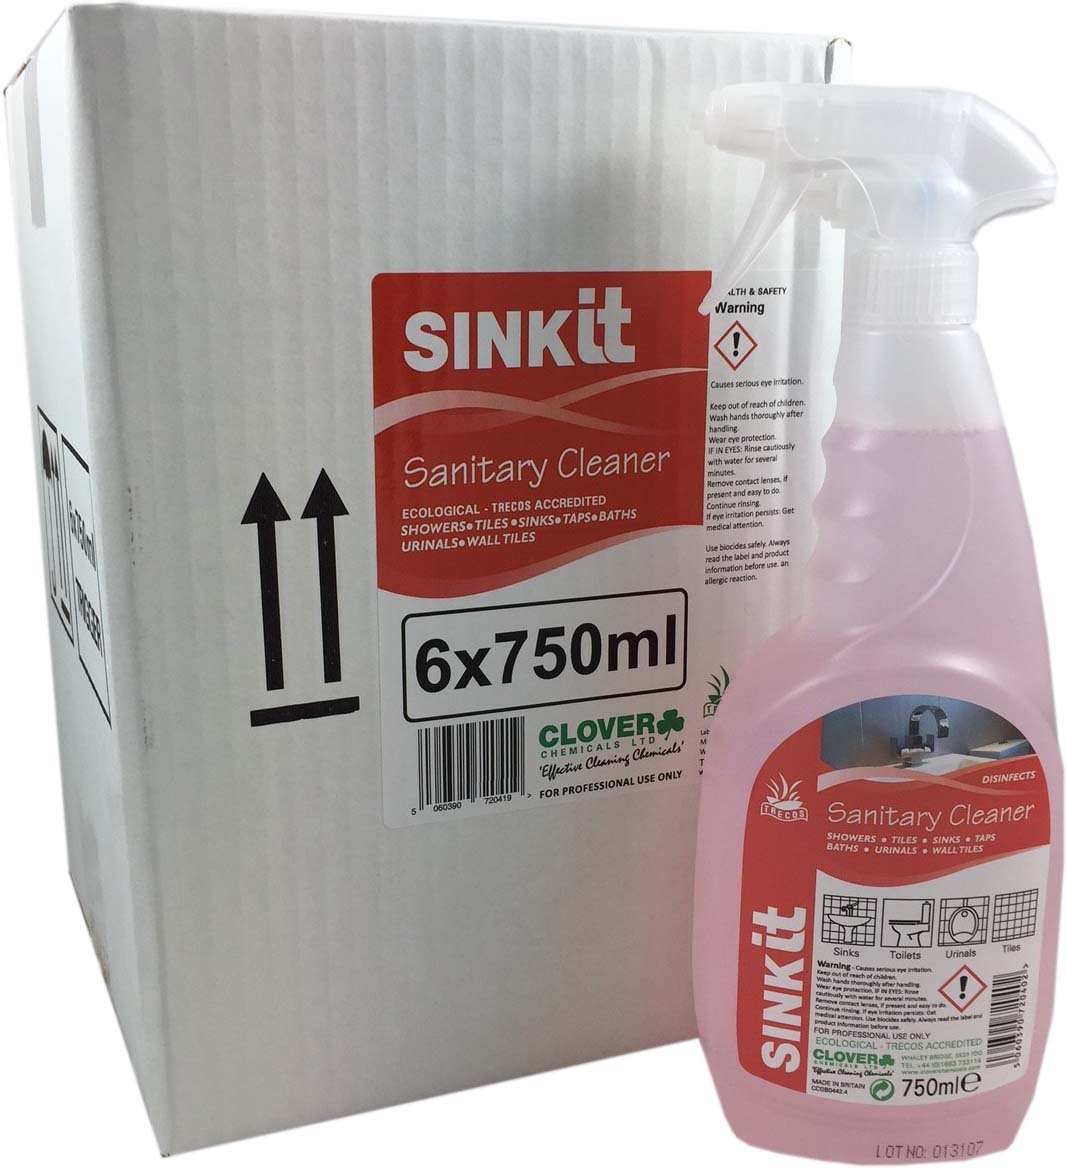 SinkIT-Ready-to-use-Sanitary-Cleaner-6x750ml